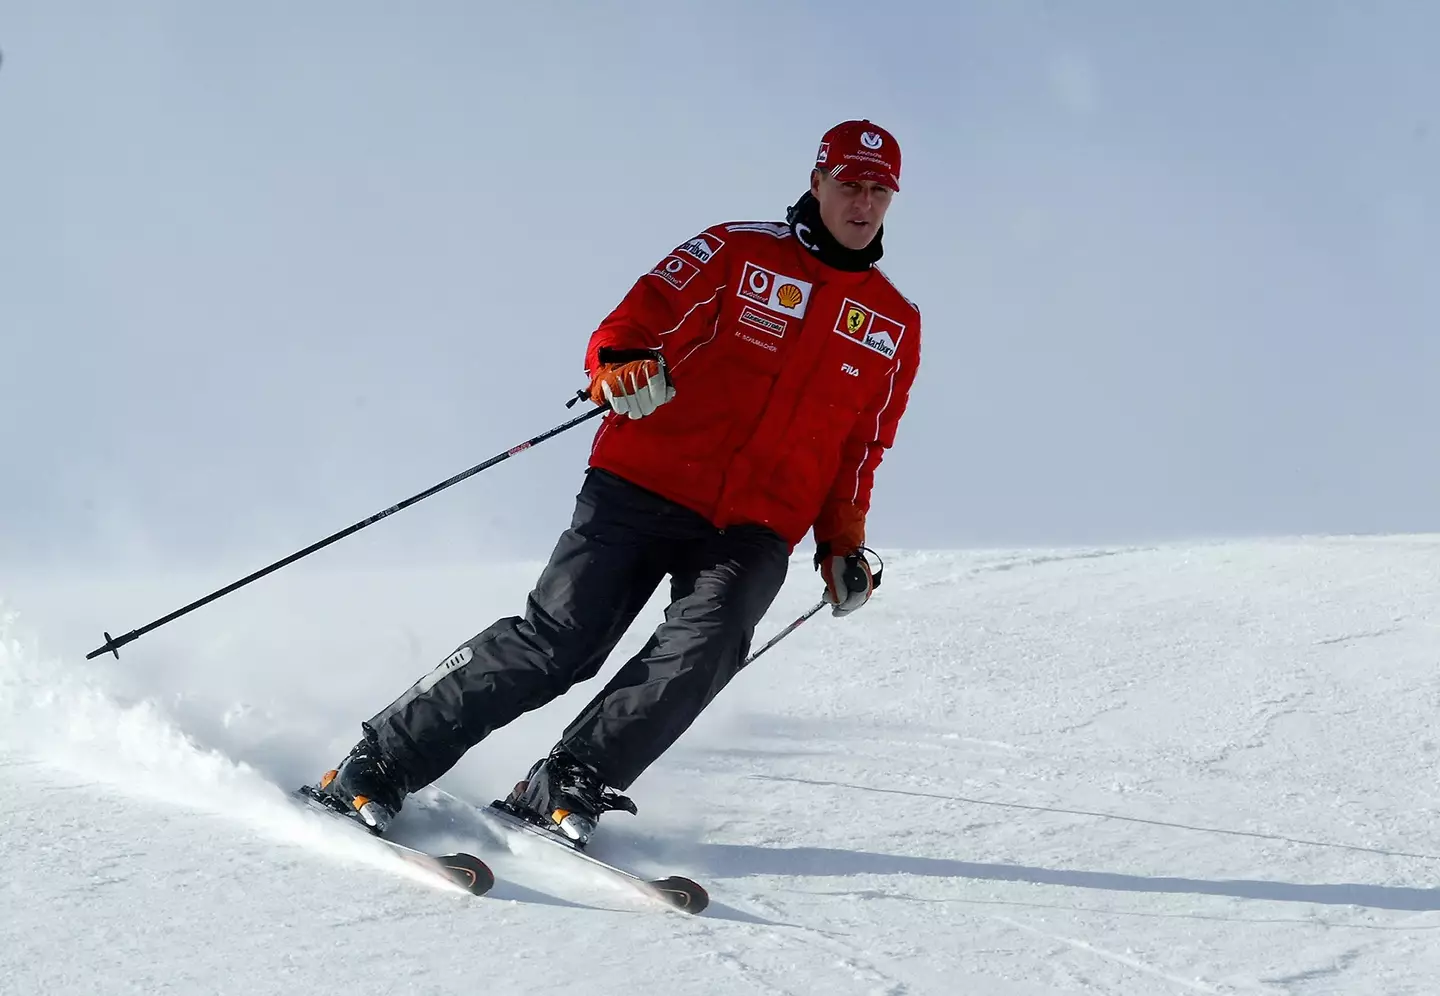 A few years before his skiing accident Schumacher made a will 'because of the things that can happen in everyday life'.